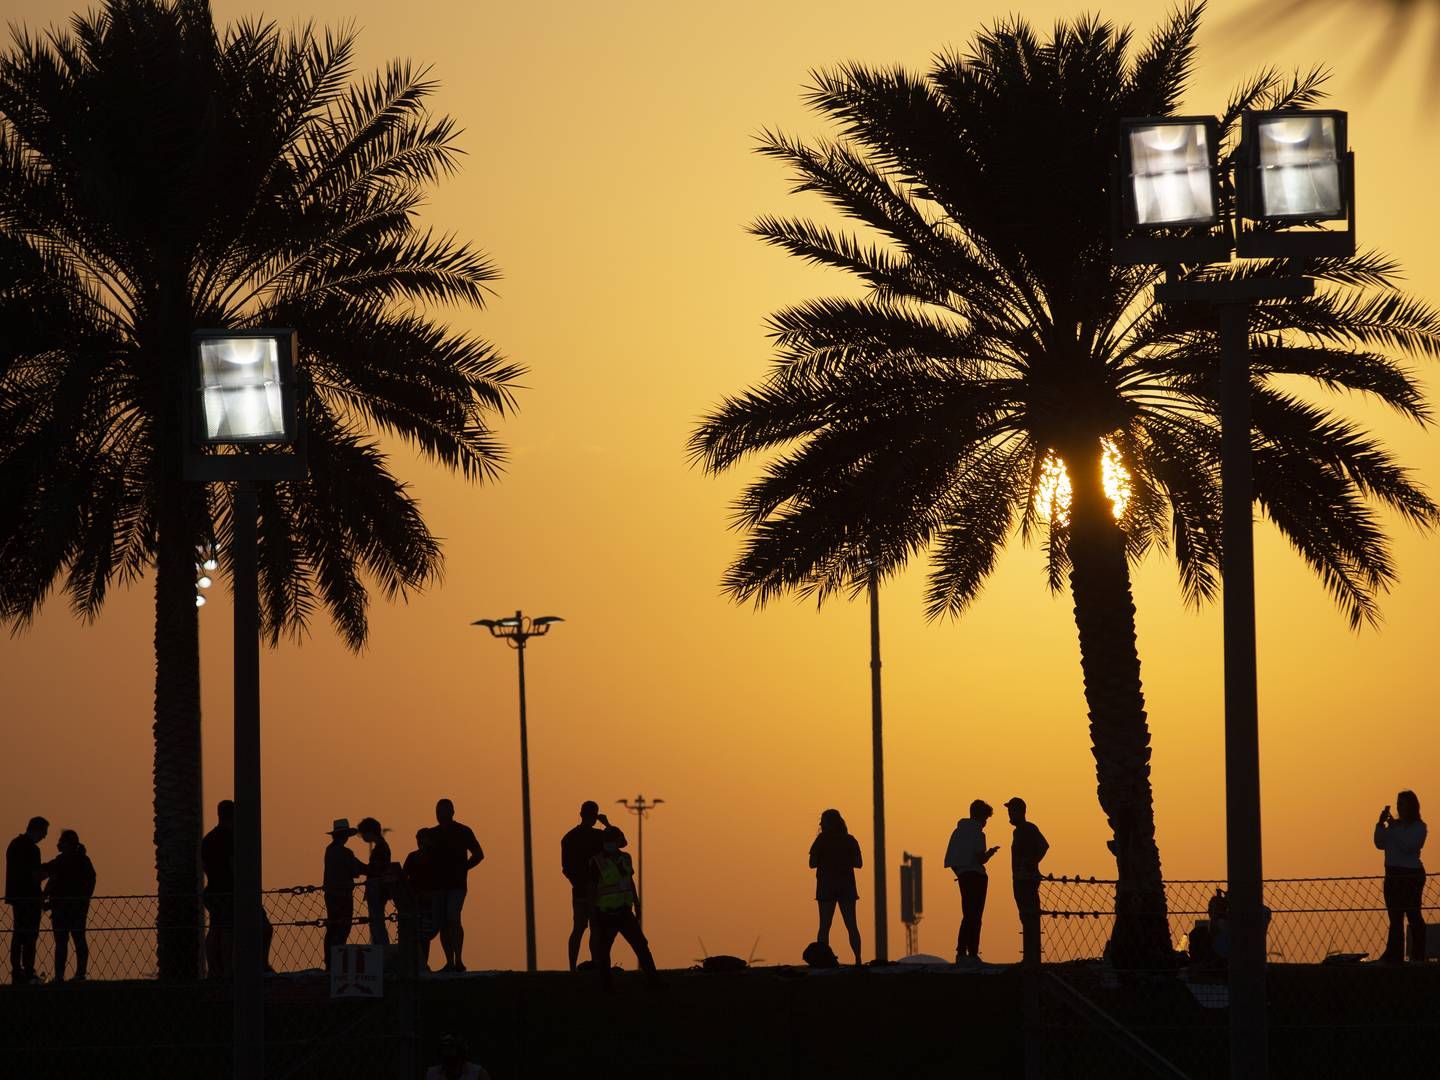 Sunset in Abu Dhabi. The UAE aims to profit as much as possible from the high oil prices. | Photo: Jan Sommer